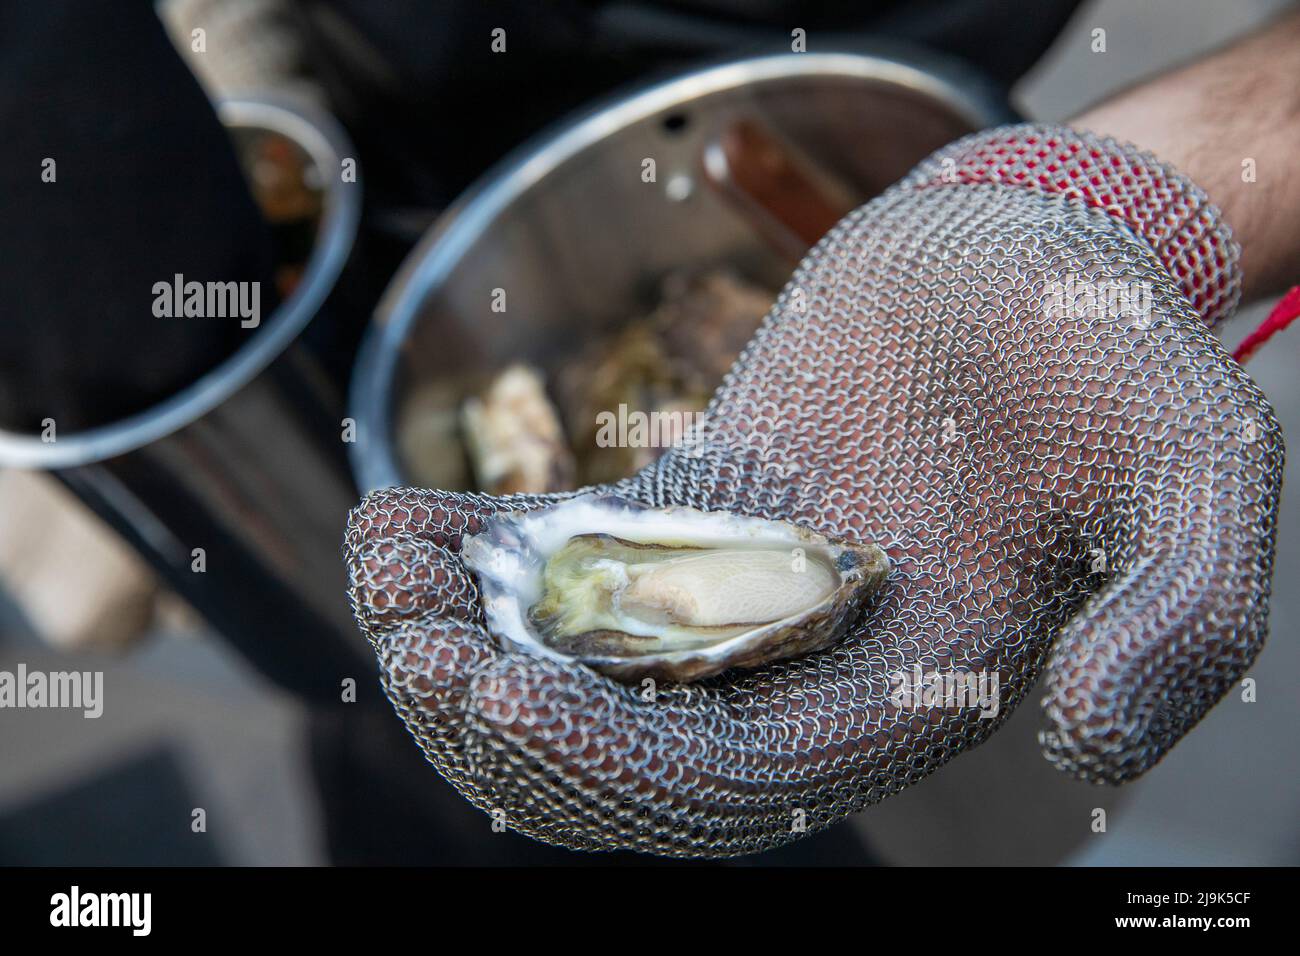 Close up hand in chainmail glove holding fresh oyster Stock Photo